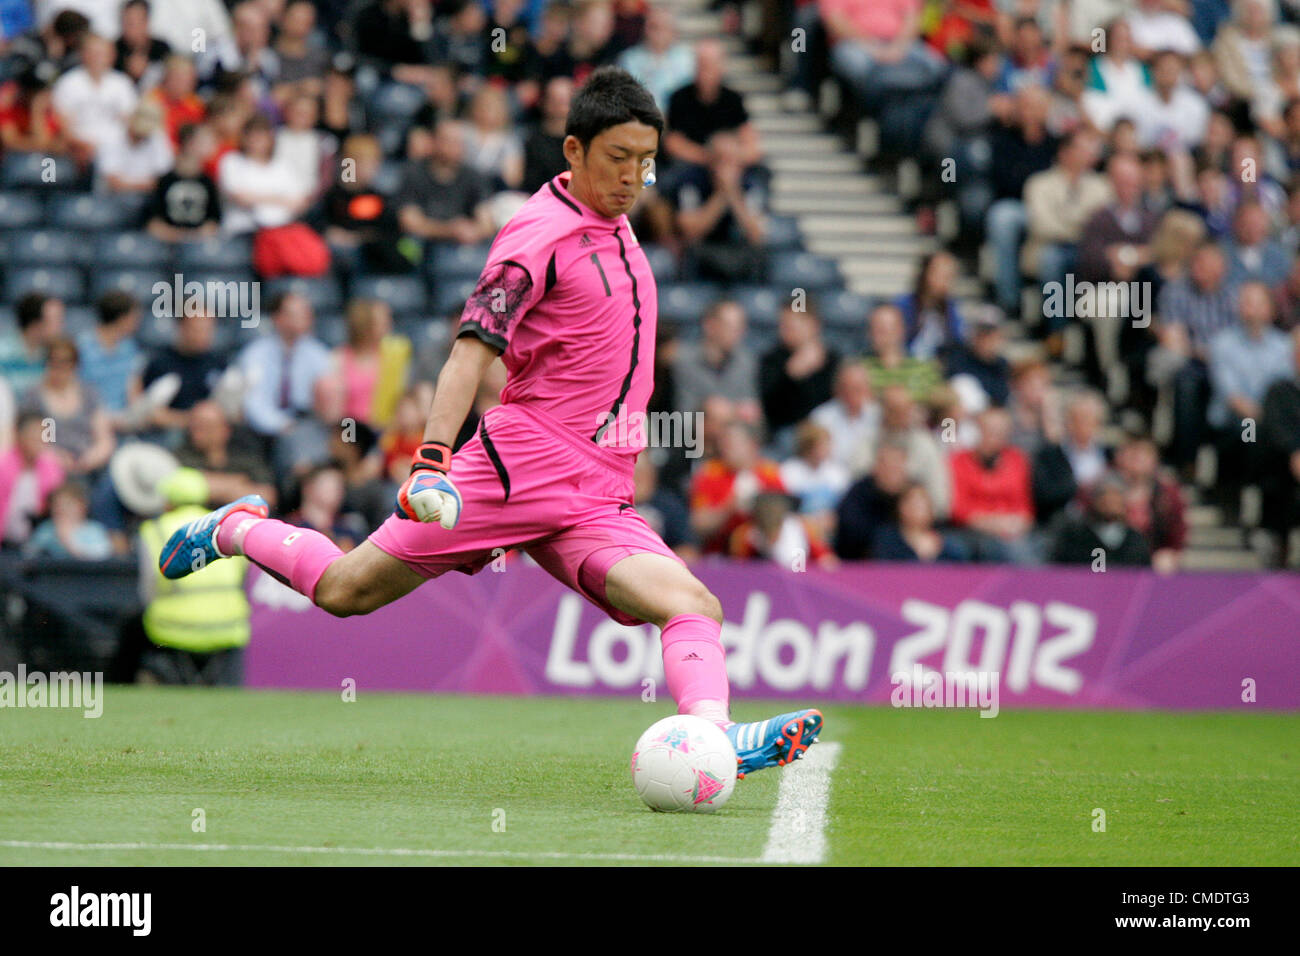 26.07.2012 Glasgow, Scotland.  1 Shuichi Gonda takes a goal kick during the Olympic Football Men's Preliminary game between Spain and Japan from Hampden Park. Japan pulled off a shock win over Spain by a score of 1-0. Stock Photo